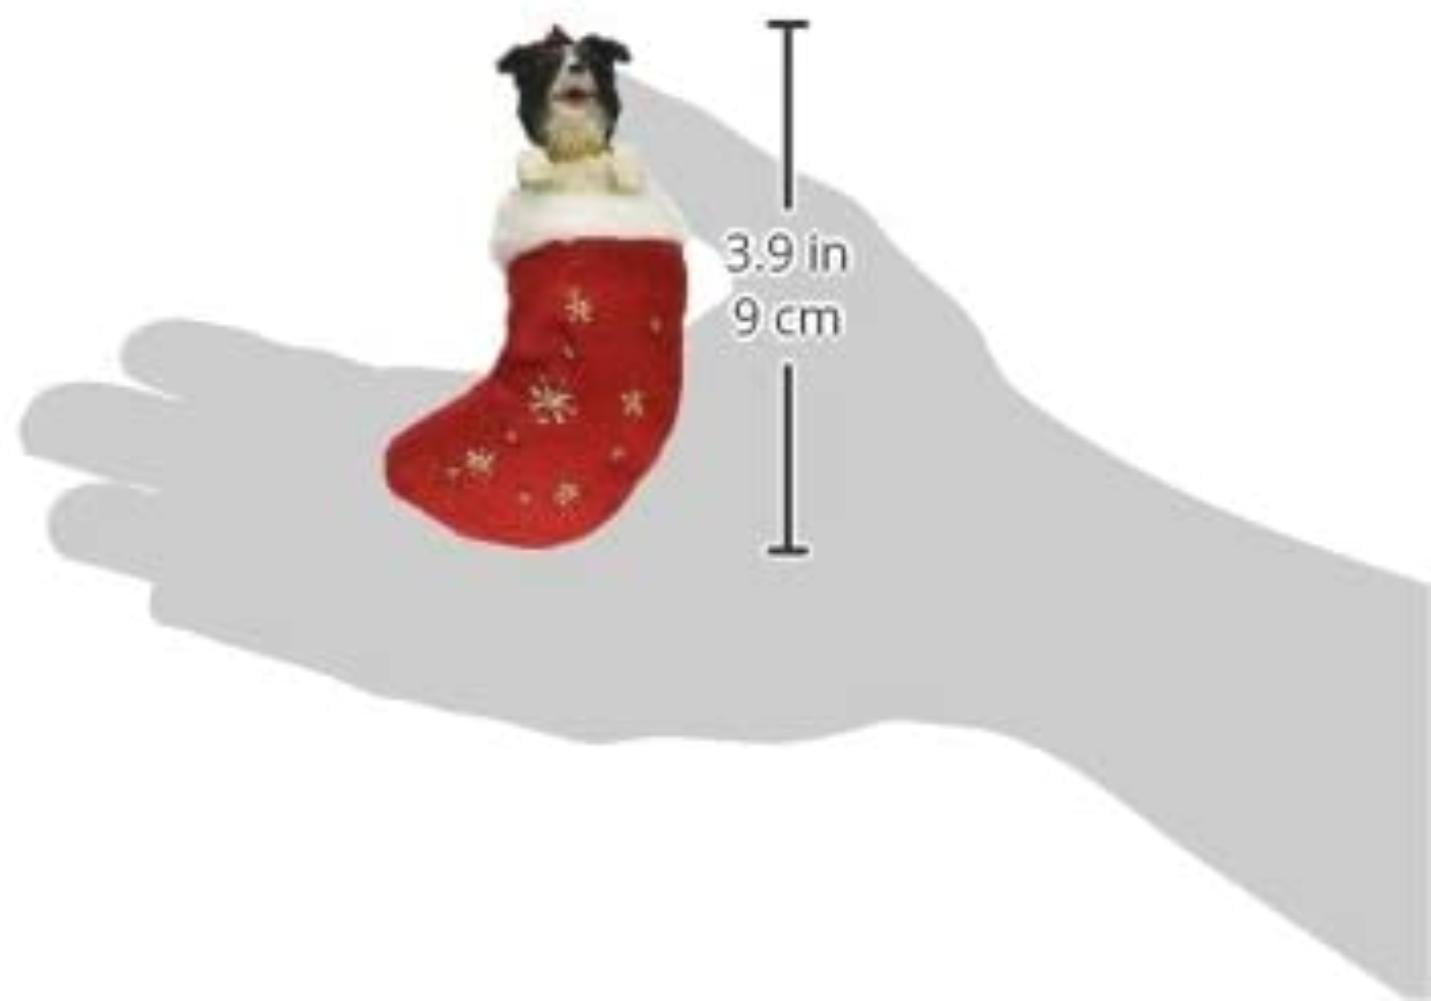 Border Collie Stocking Ornament with "Santa's Little Pals" Hand Painted 875623009576 